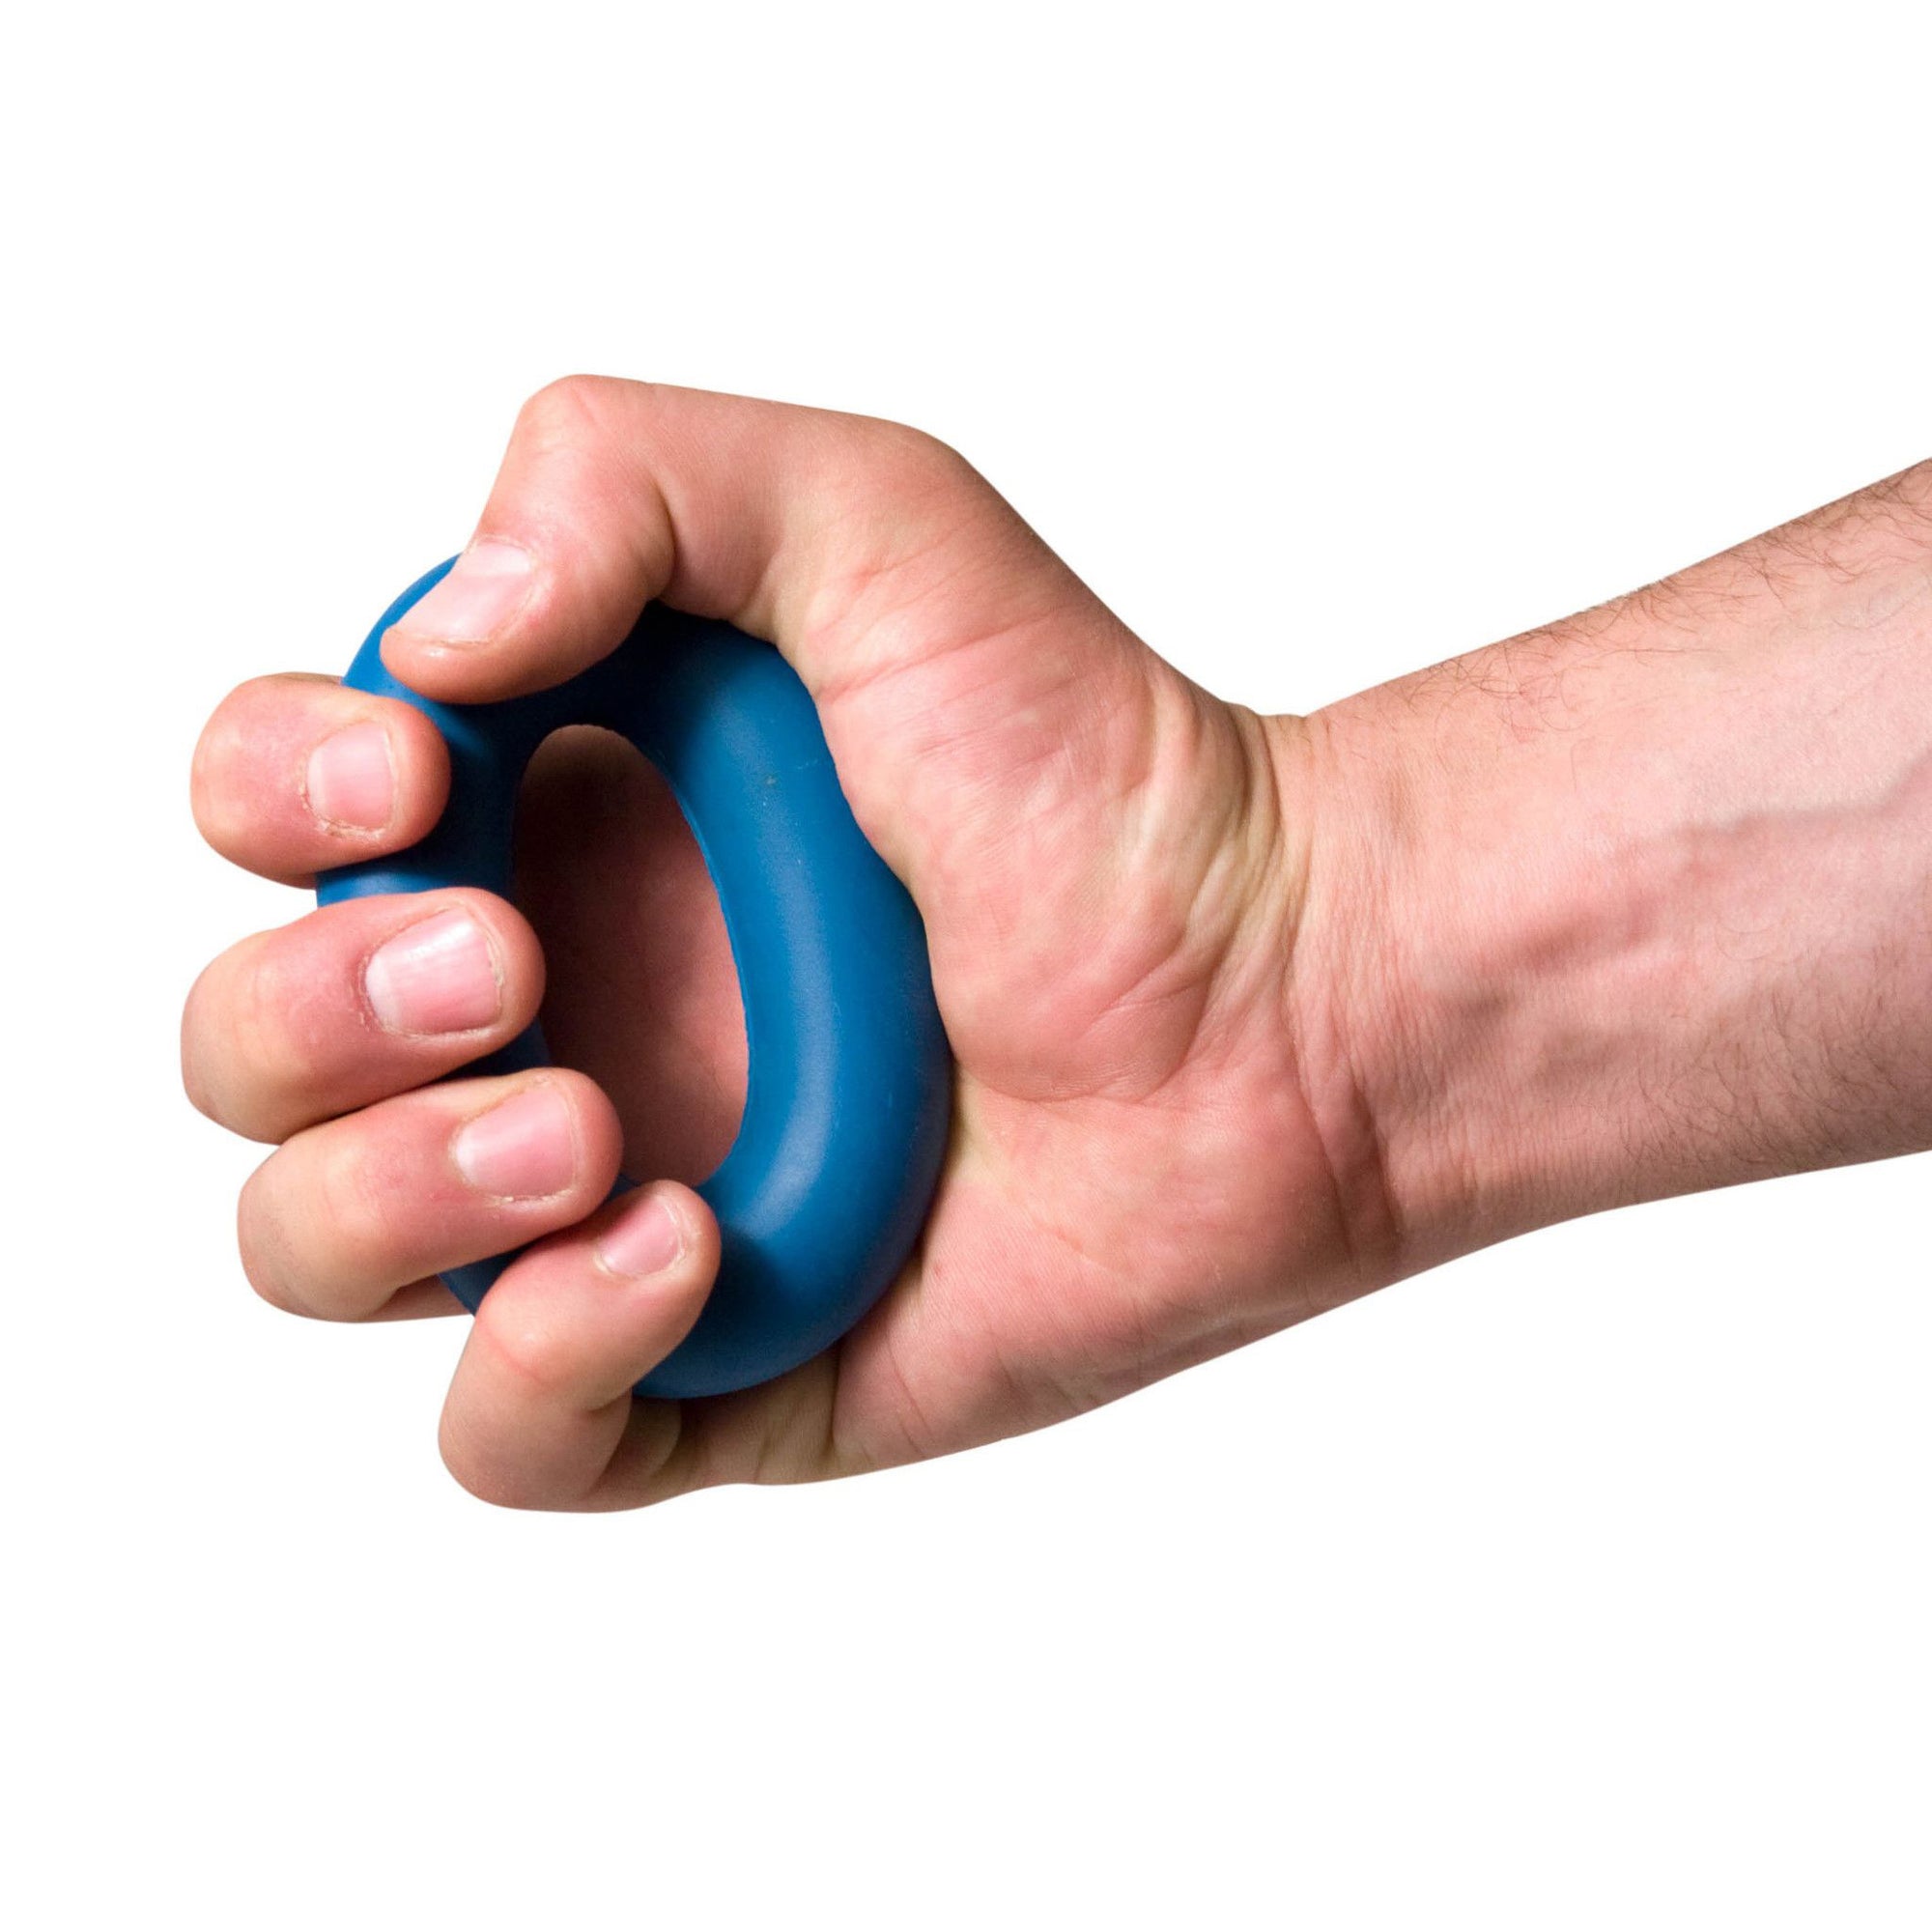 forearm trainer in action, being forcefully squeezed by a forearm